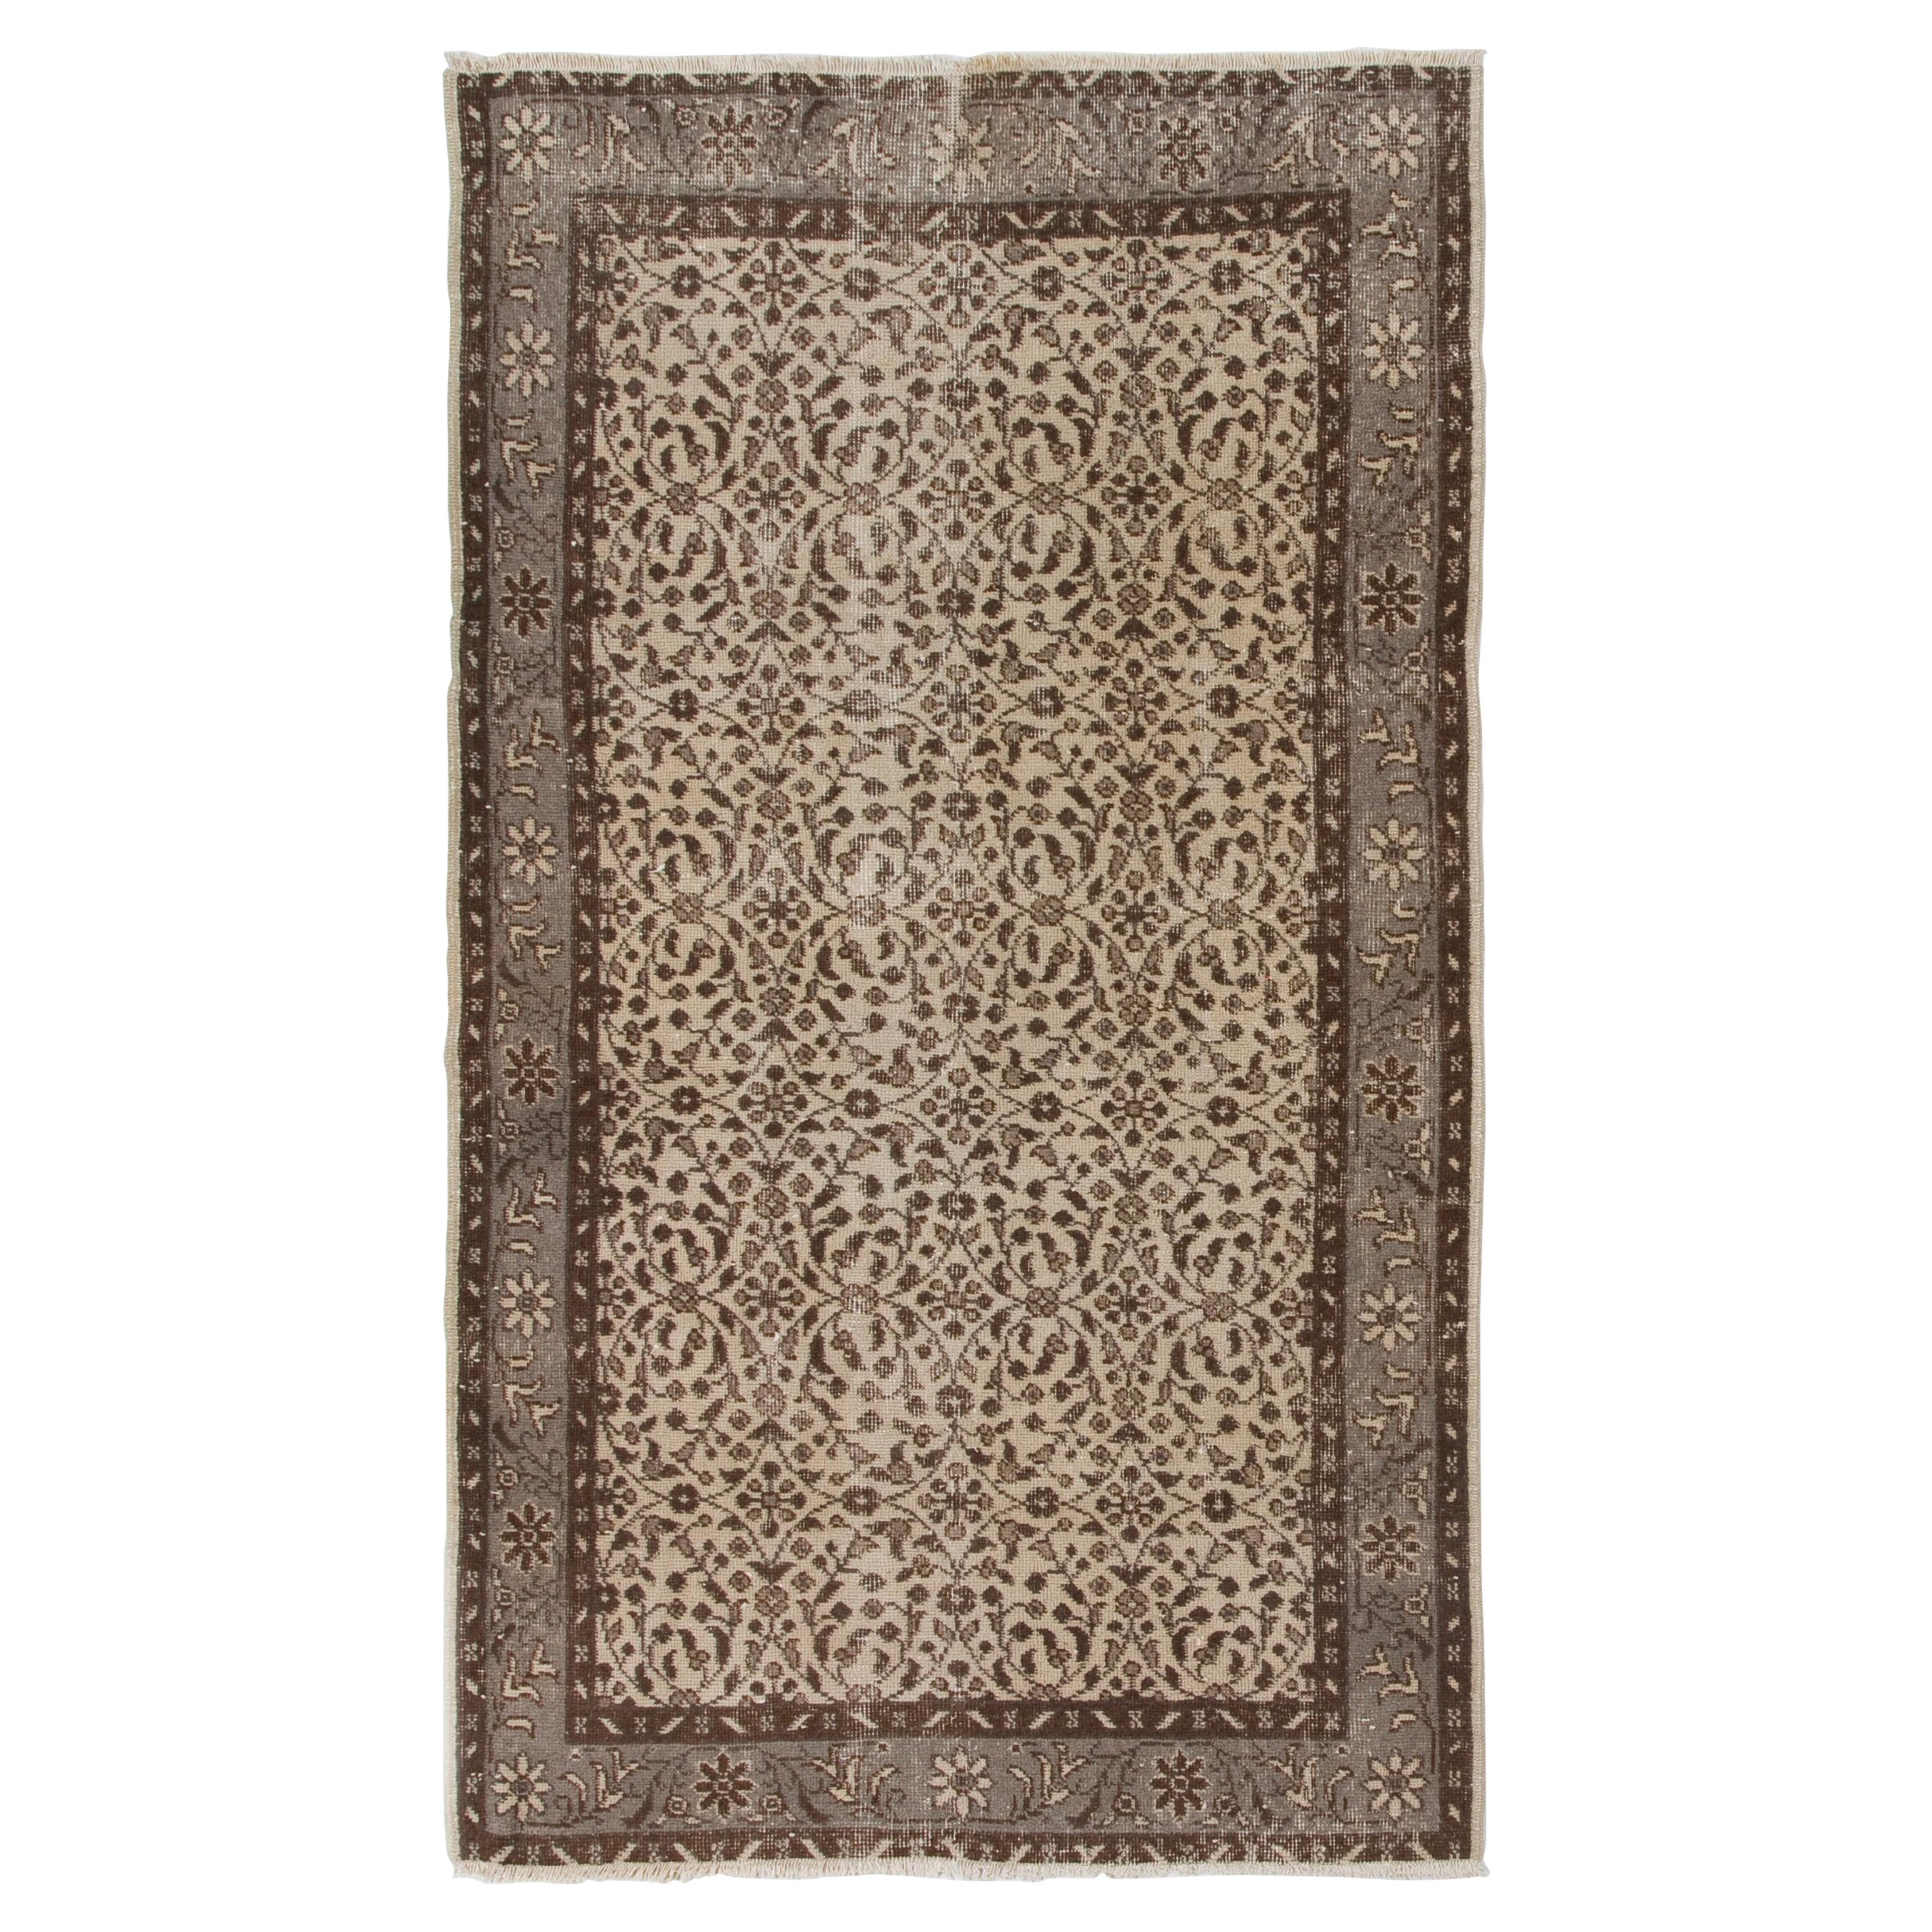 Handmade Vintage Turkish Oushak Accent Rug with All-Over Floral Design 4x6.8 ft For Sale